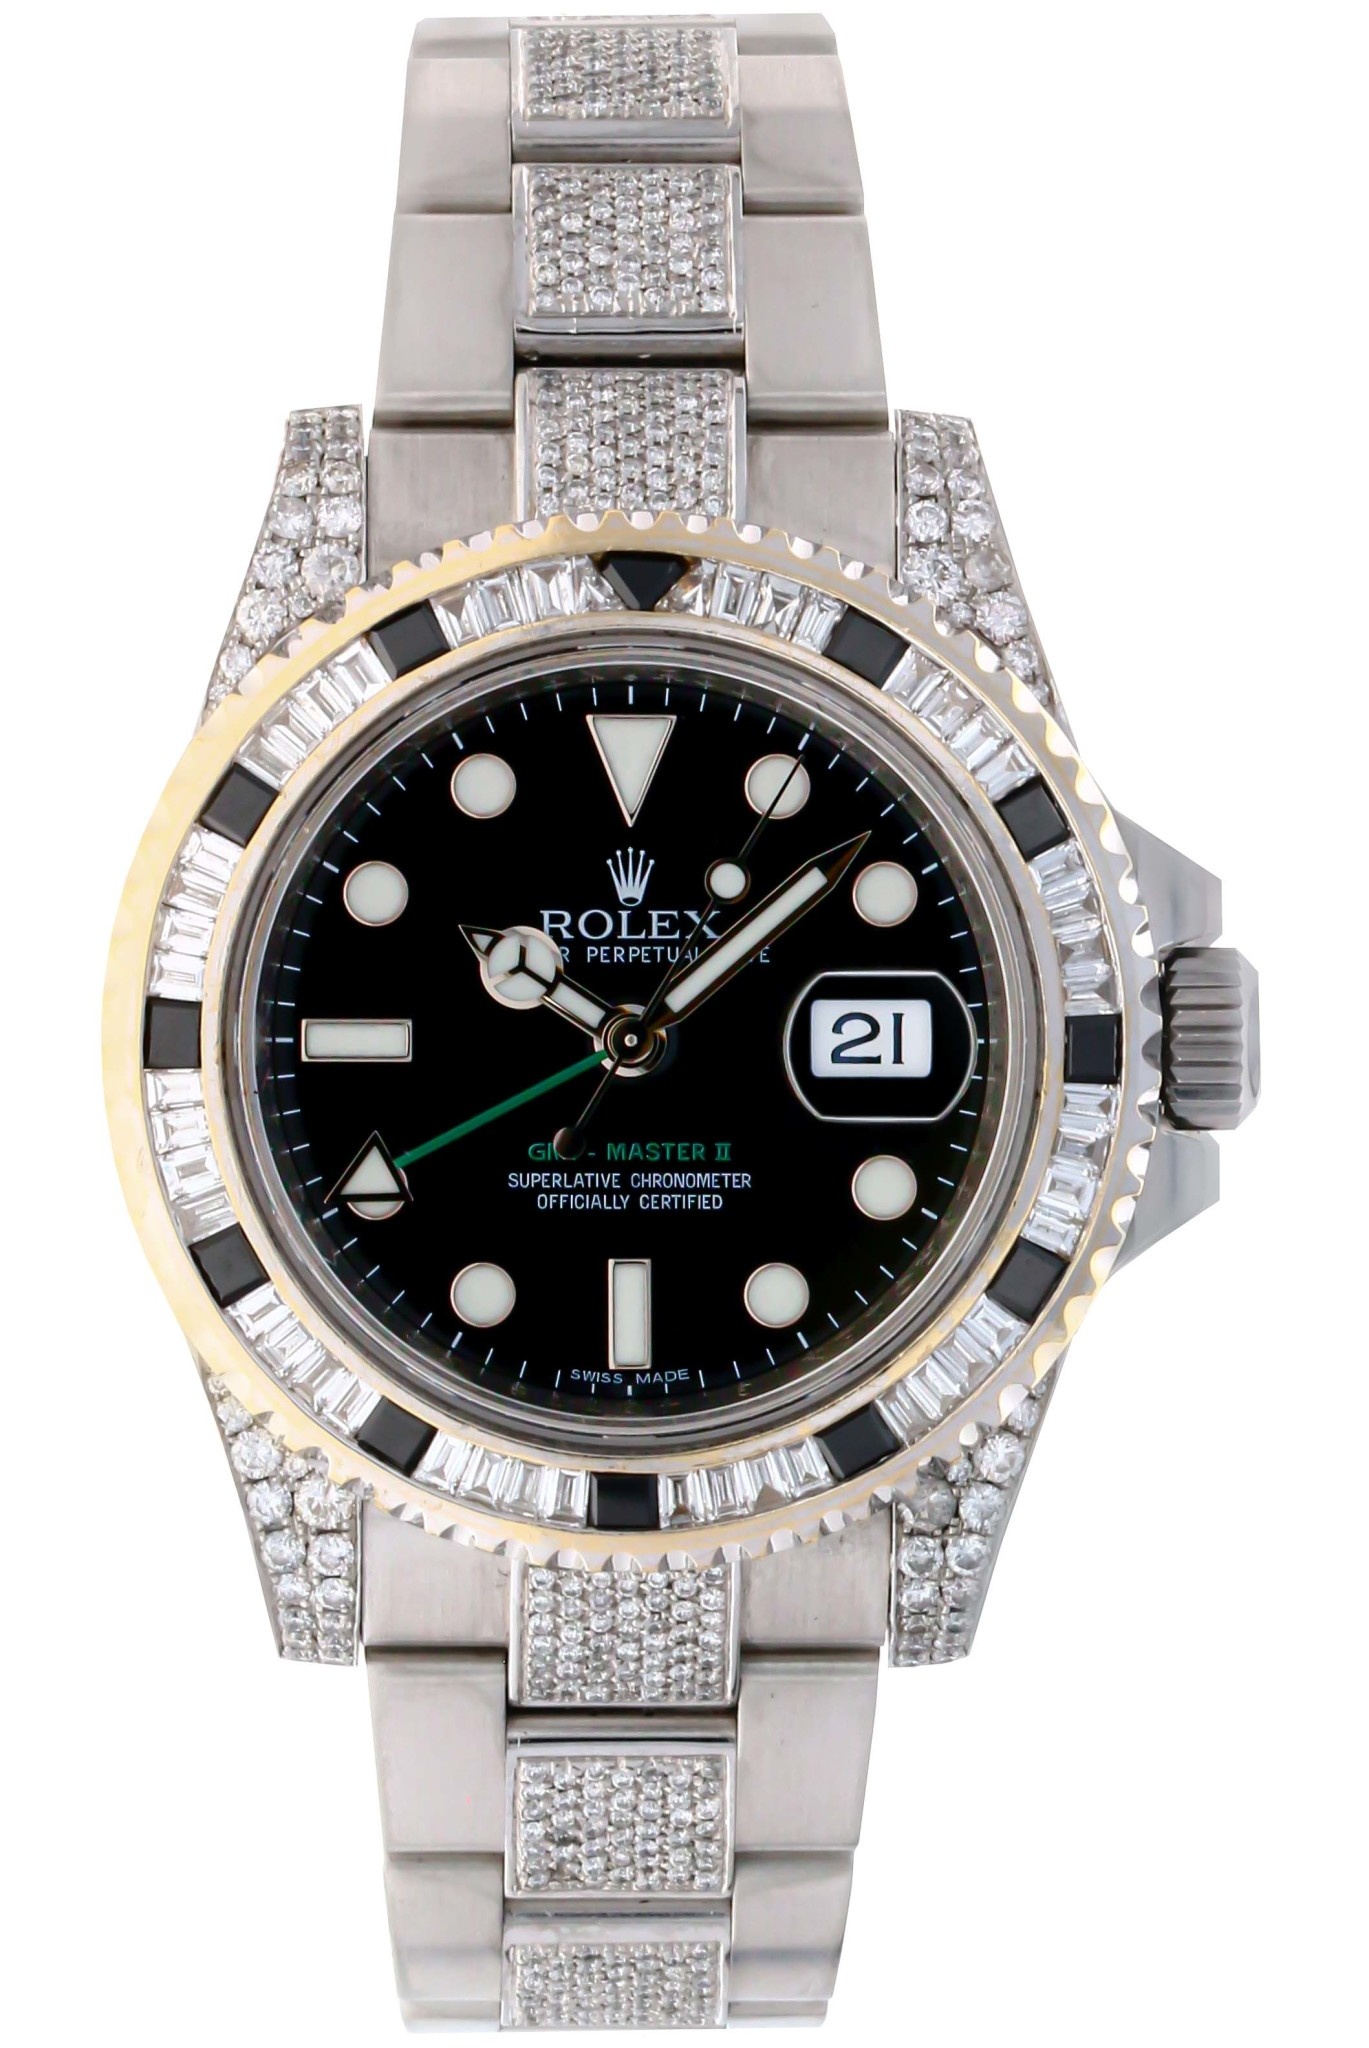 ROLEX GMT MASTER II ICEDOUT (G SERIAL 